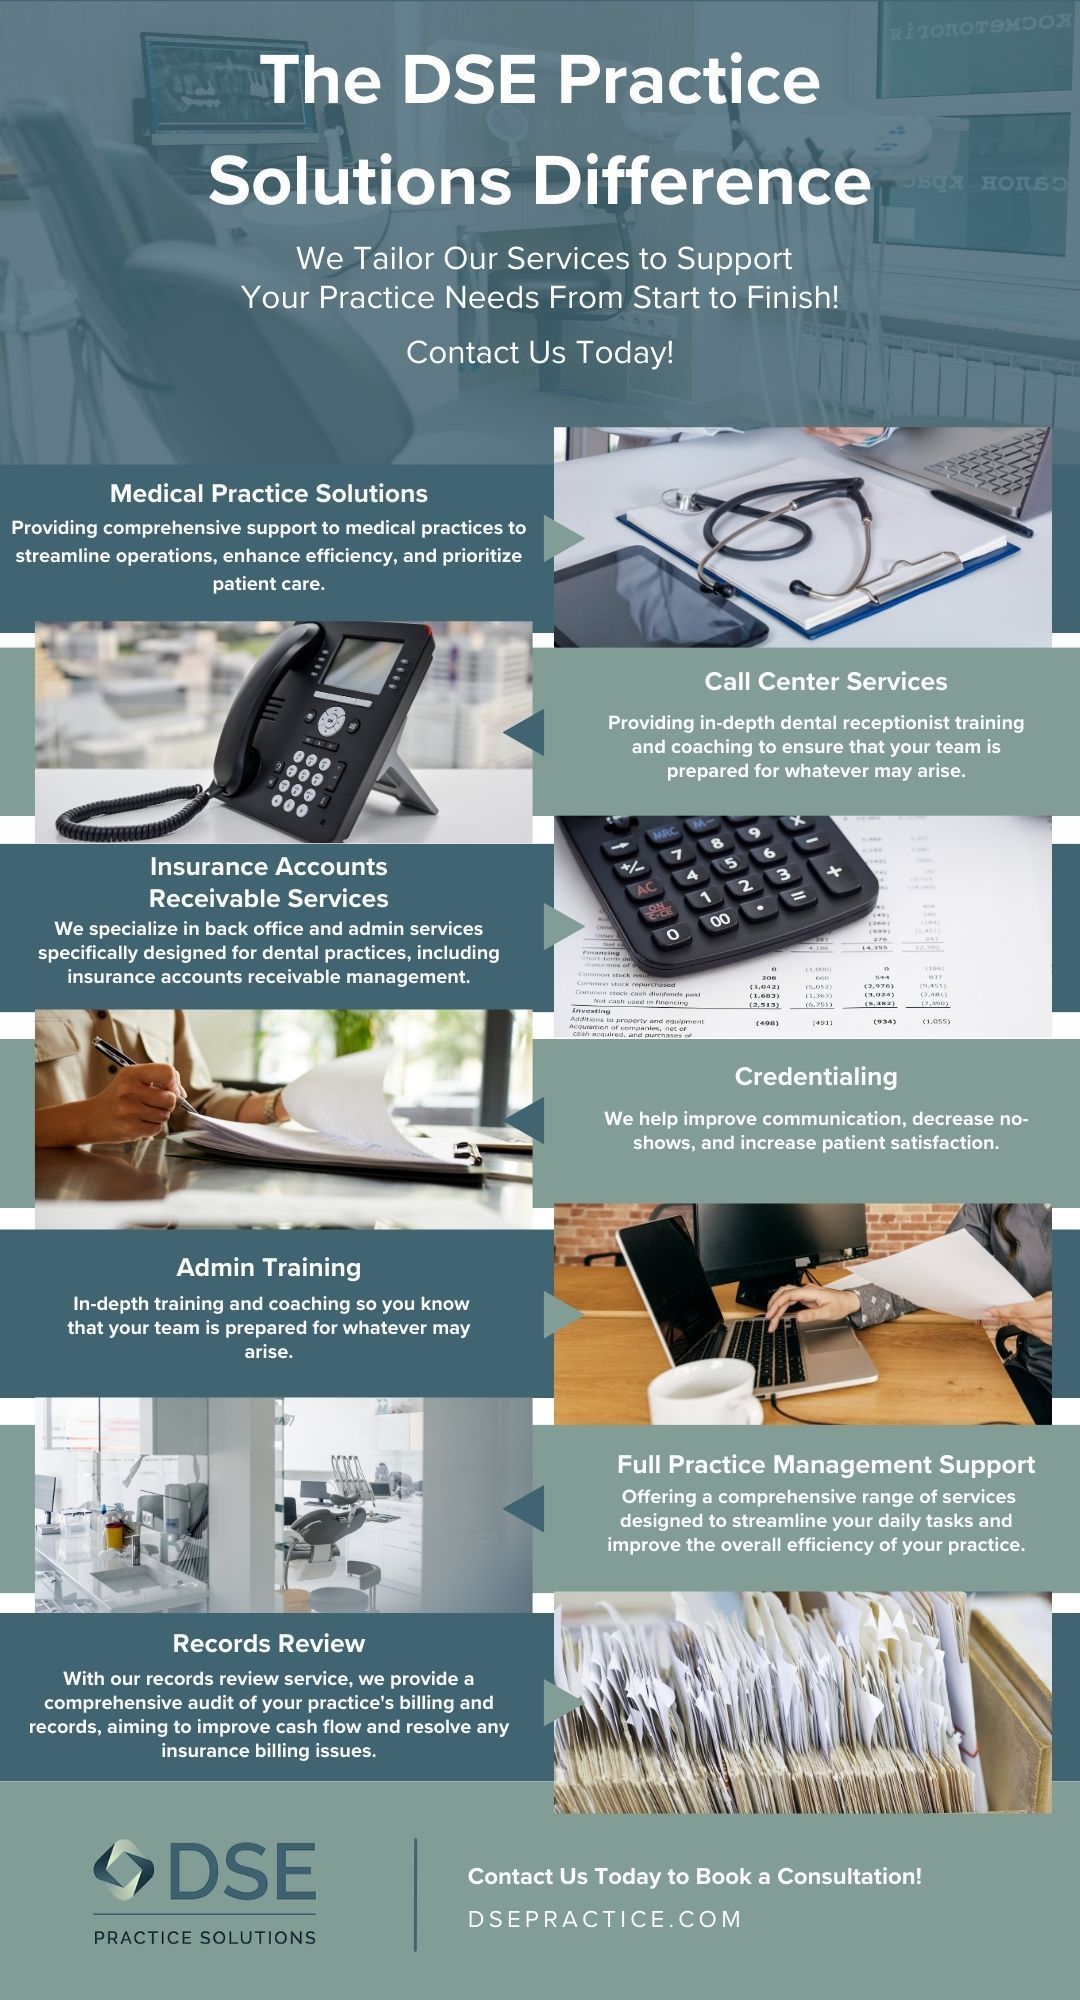 M40884 - The DSE Practice Solutions Difference - Infographic.jpg